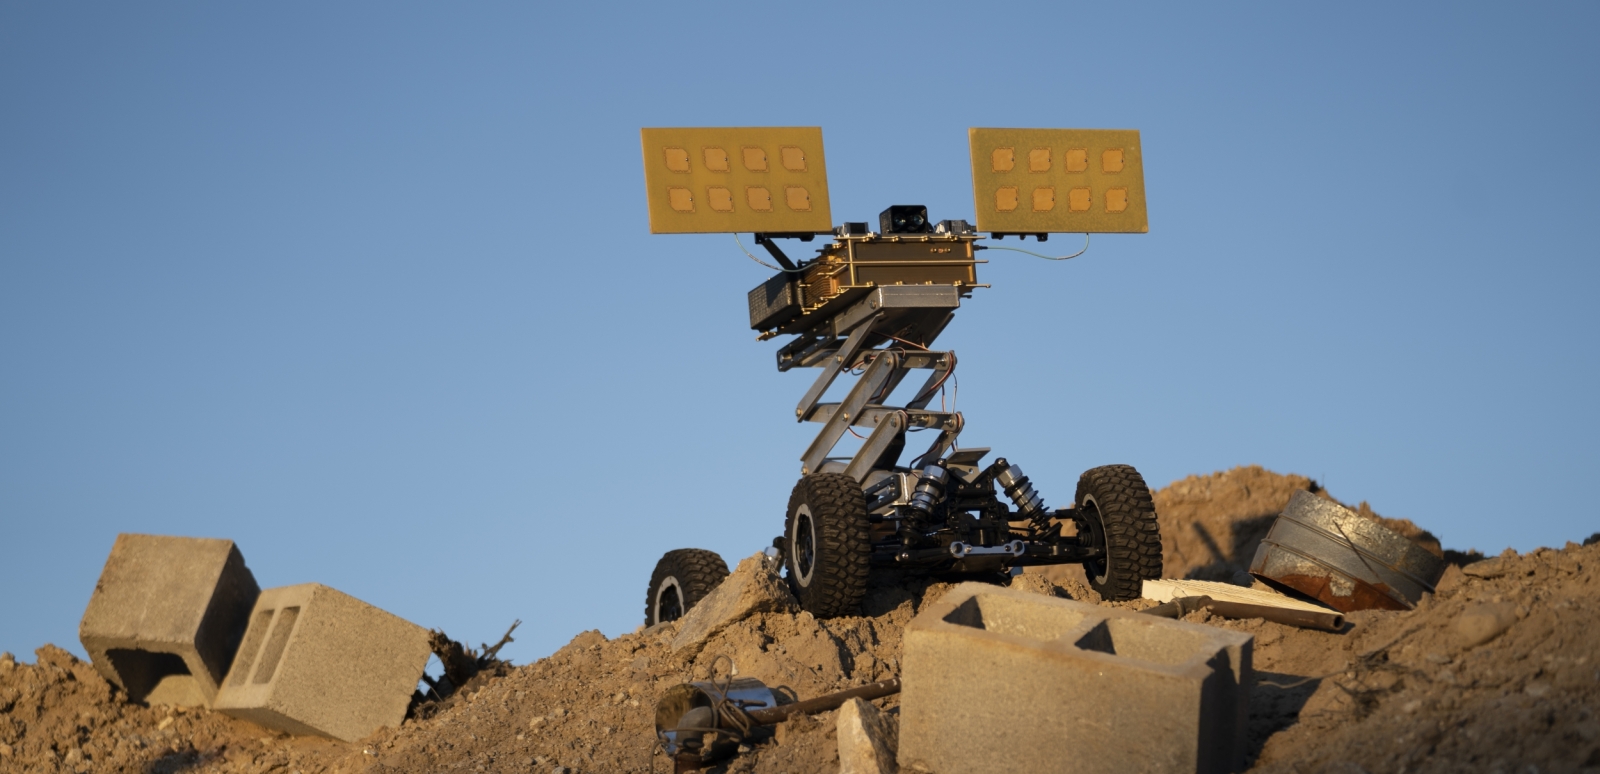 A photo of a small unmanned vehicle with solar panels on top, on top of a mound of dirt.